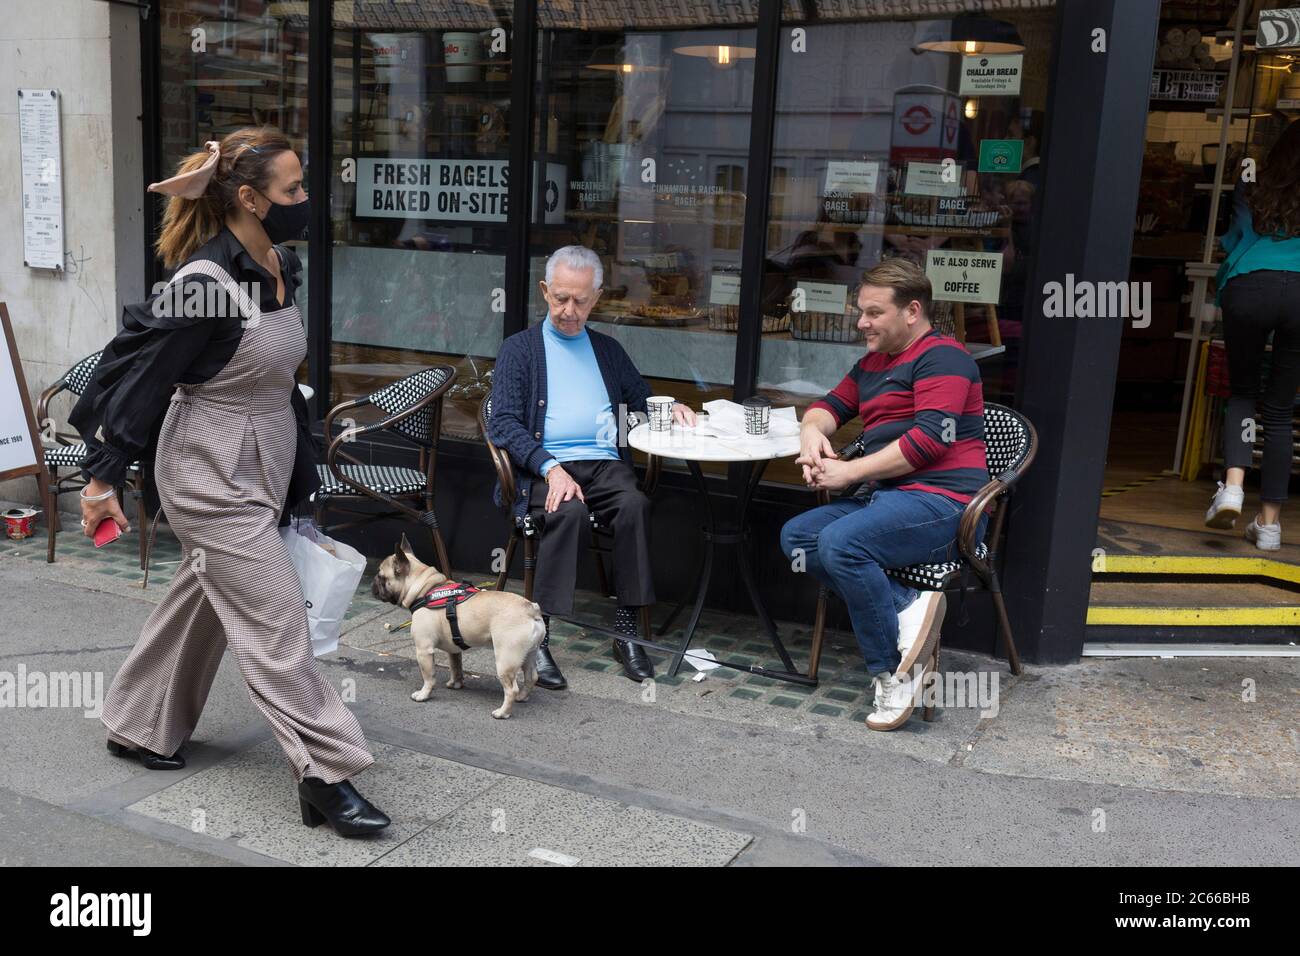 With the Coronavirus pandemic lockdown rules being eased, pubs and restaurant businesses are slowly re-opening and social distanced customers and their dog sit outside a cafe and people-watch on Wardour Street in Soho in the capital's West End, on 6th July 2020, in London, England. Stock Photo